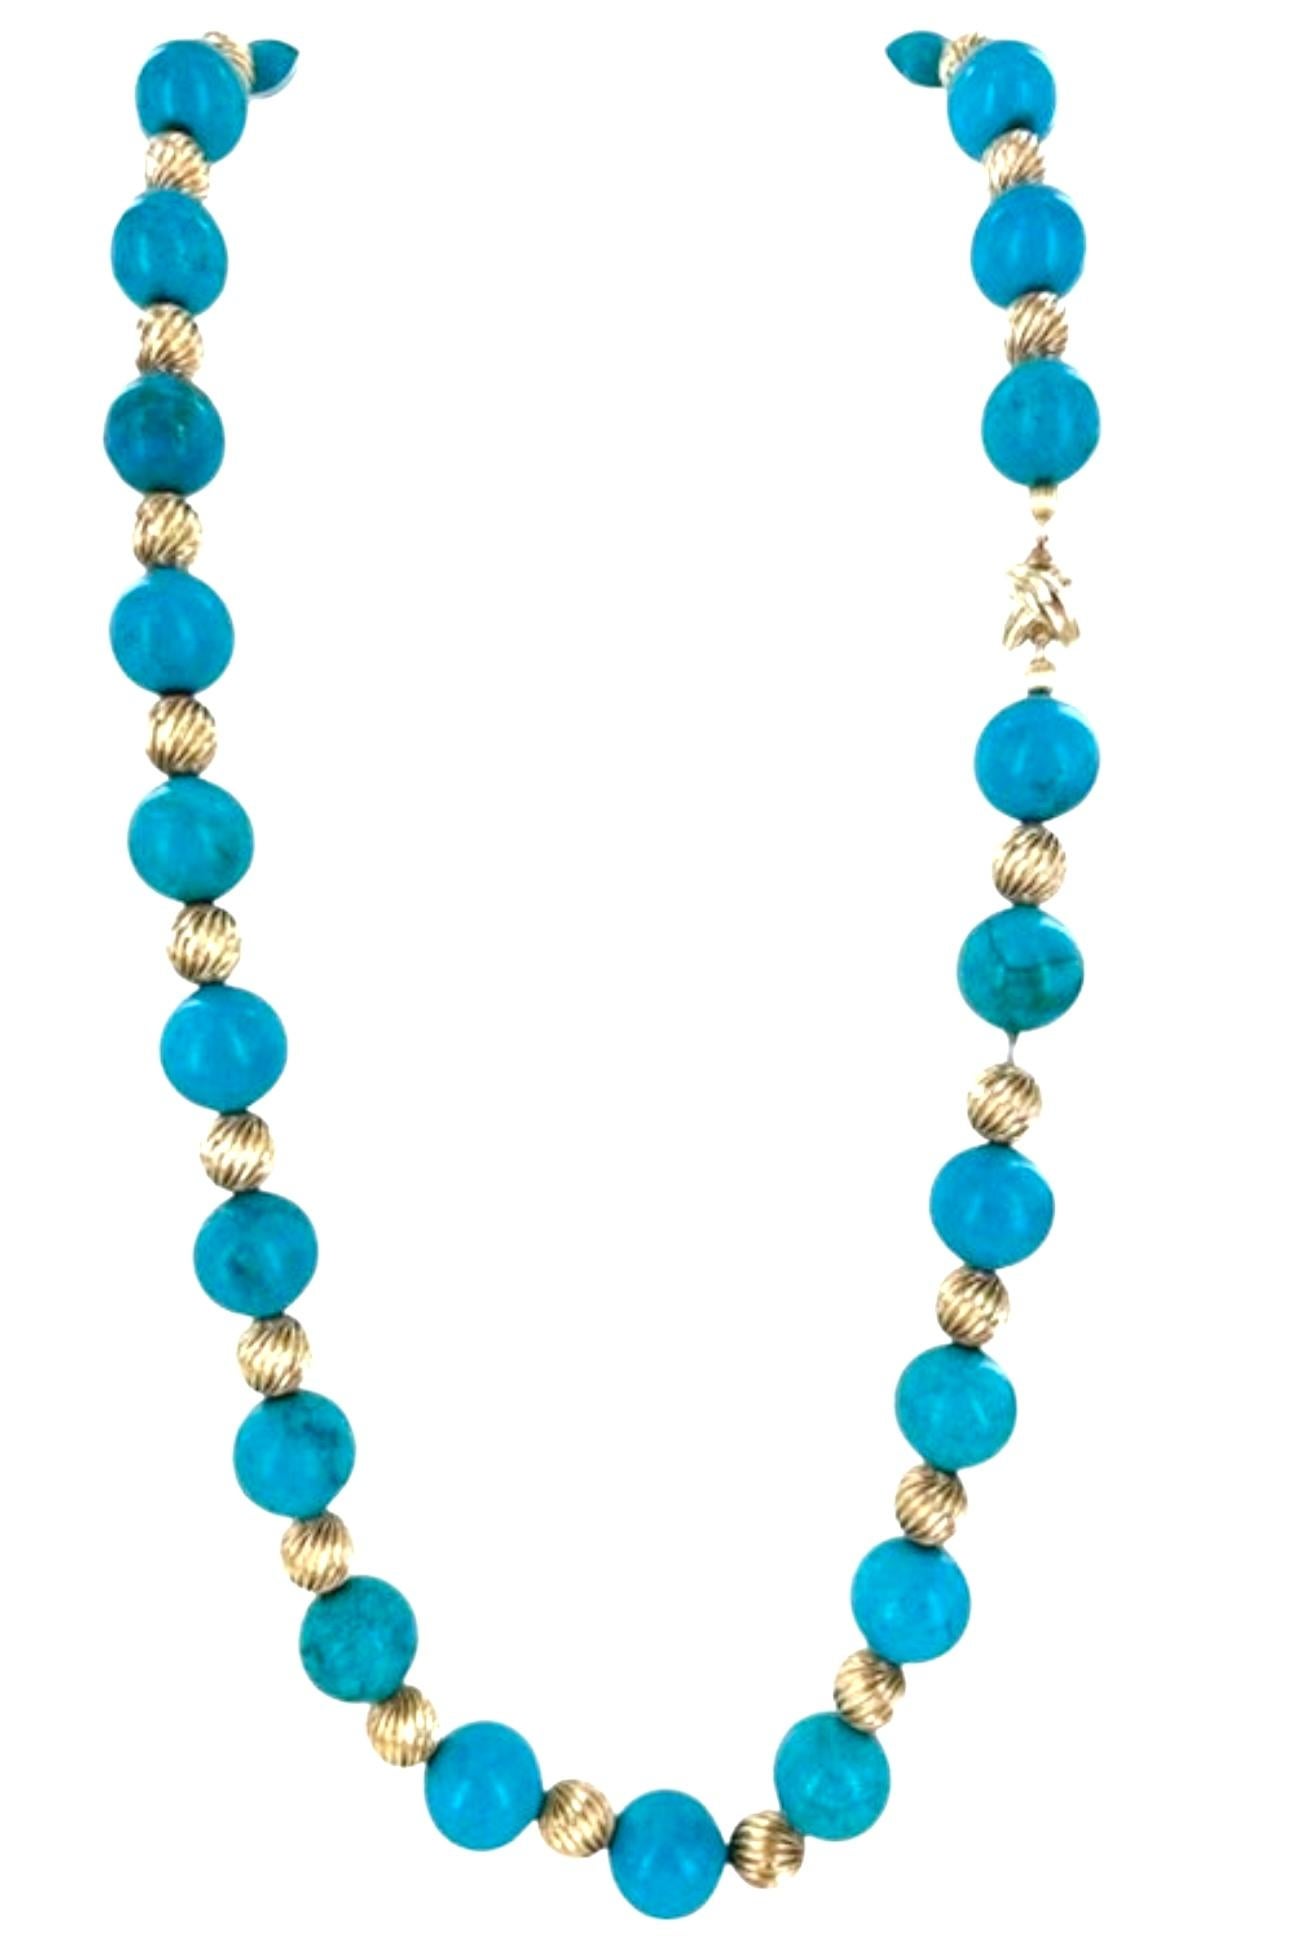 Tiffany & Co. Vintage Natural Turquoise & Yellow Gold Bead Necklace X Clasp For Sale 9